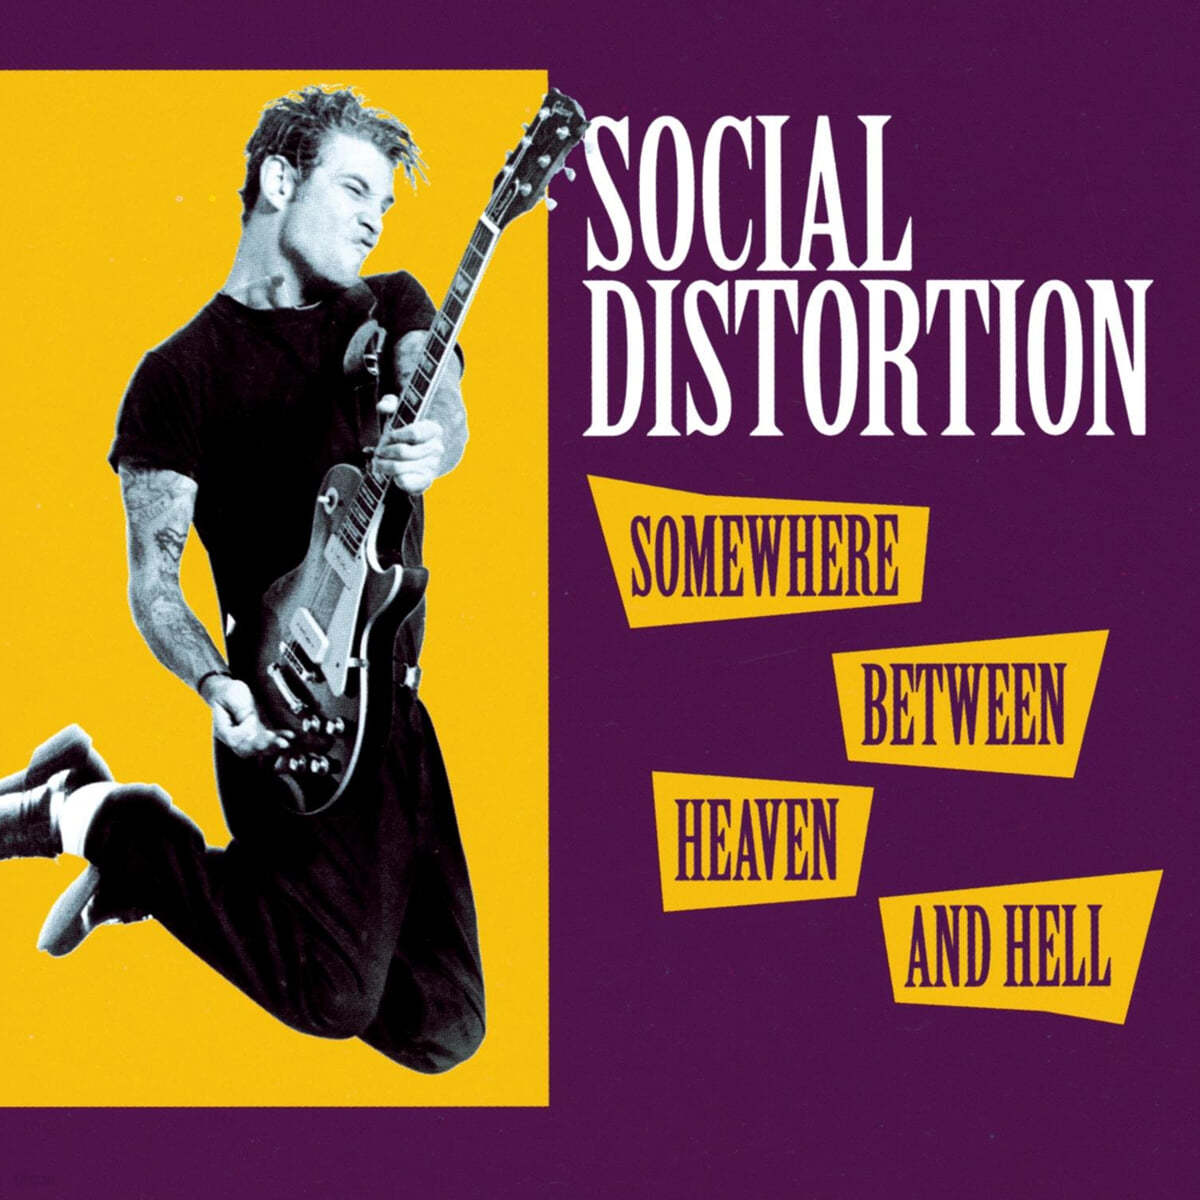 Social Distortion (소셜 디스토션) - Somewhere Between Heaven And Hell [LP]